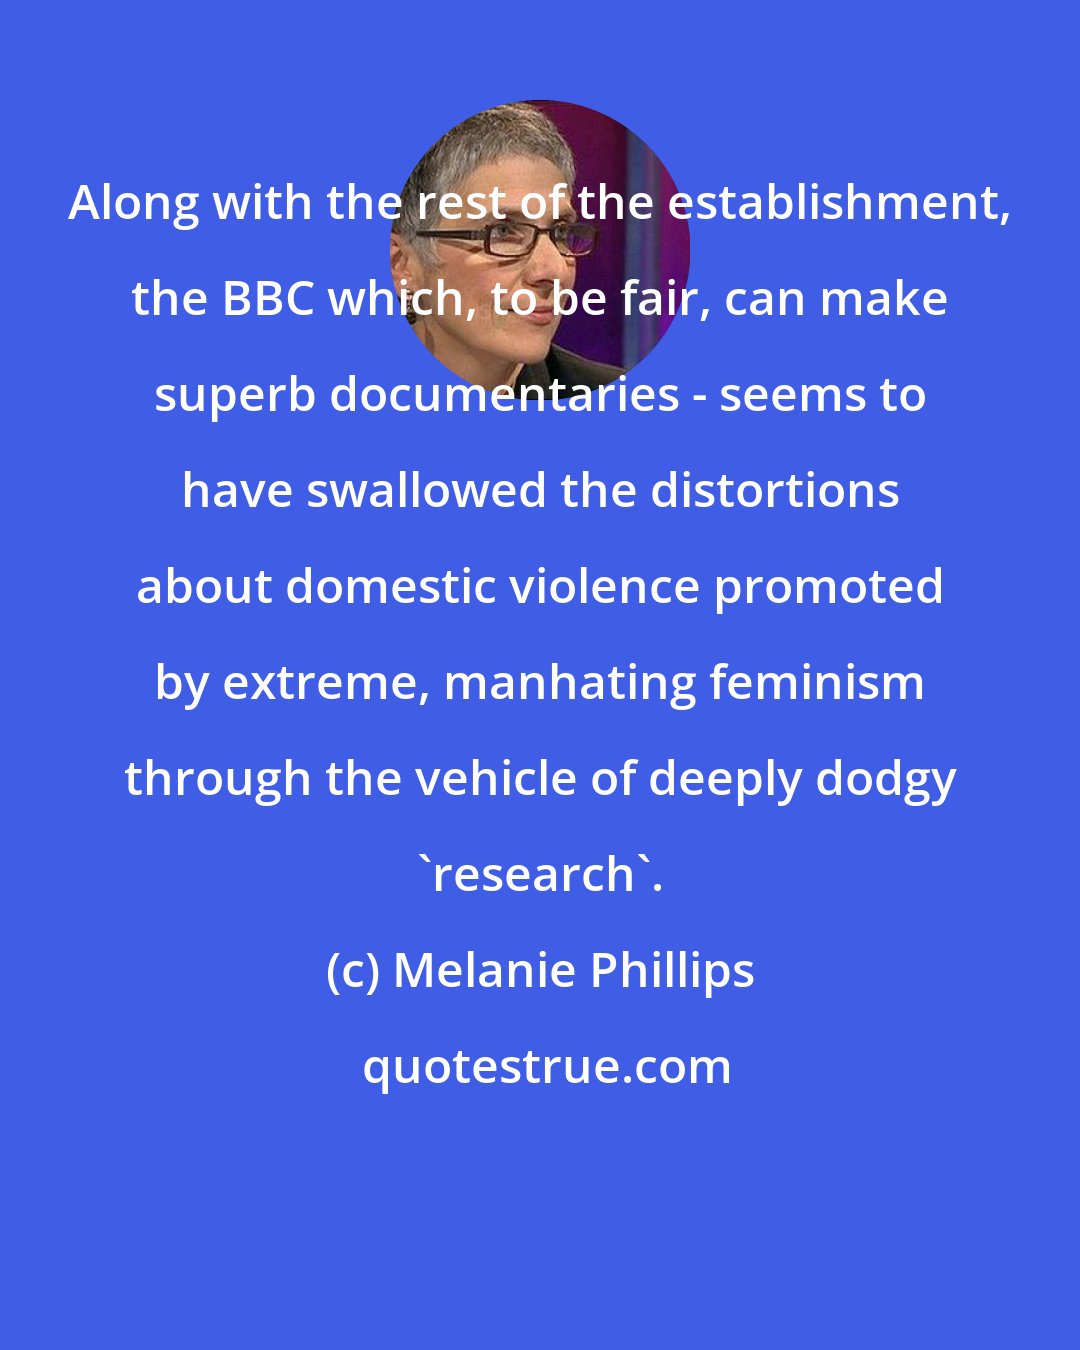 Melanie Phillips: Along with the rest of the establishment, the BBC which, to be fair, can make superb documentaries - seems to have swallowed the distortions about domestic violence promoted by extreme, manhating feminism through the vehicle of deeply dodgy 'research'.